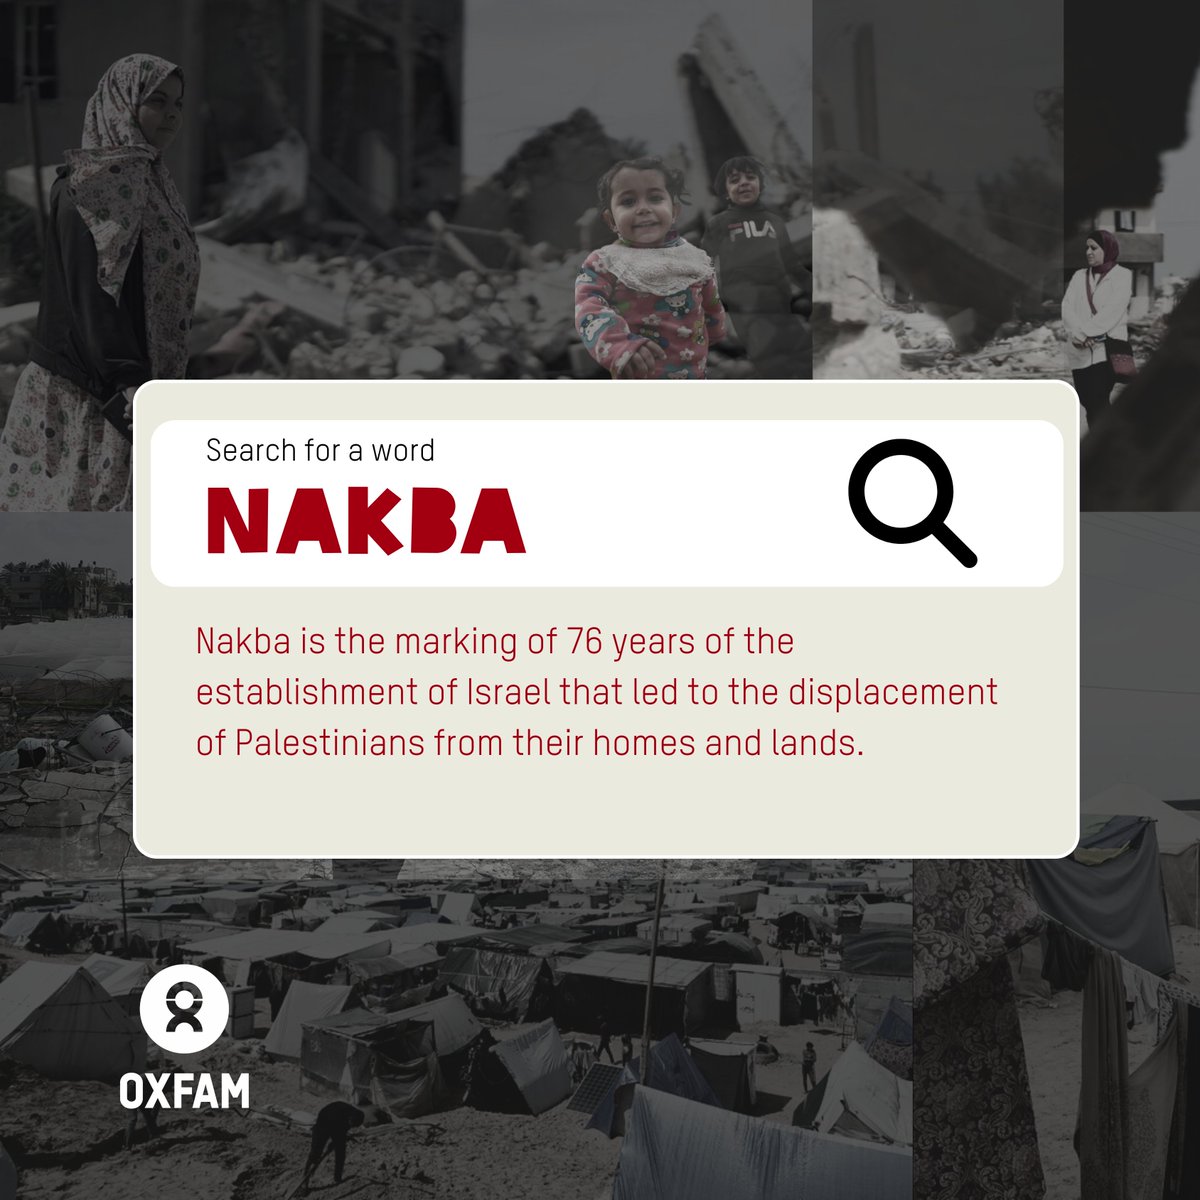 When Israel was established 76 years ago, 750,000 people were forced to flee from their homes in what Palestinians call the #Nakba, the “catastrophe”. The crisis in Gaza is a continuation of Palestinian displacement history. Israel’s brutal occupation must end. #CeasefireNOW